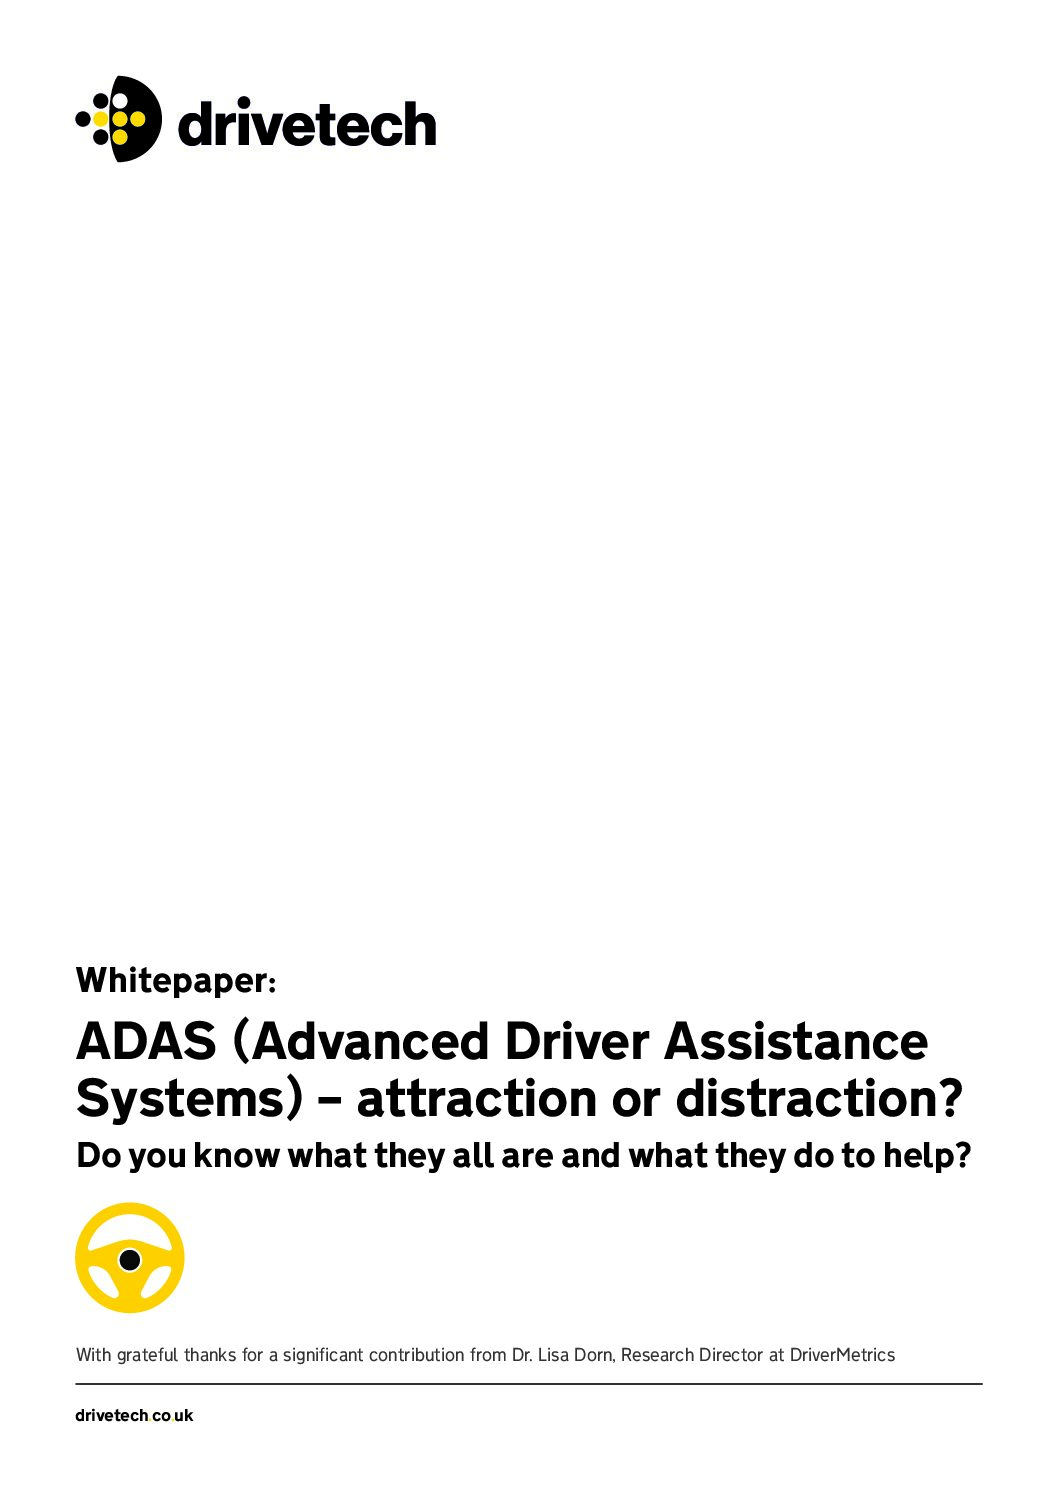 Whitepaper – ADAS (Advanced Driver Assistance Systems)